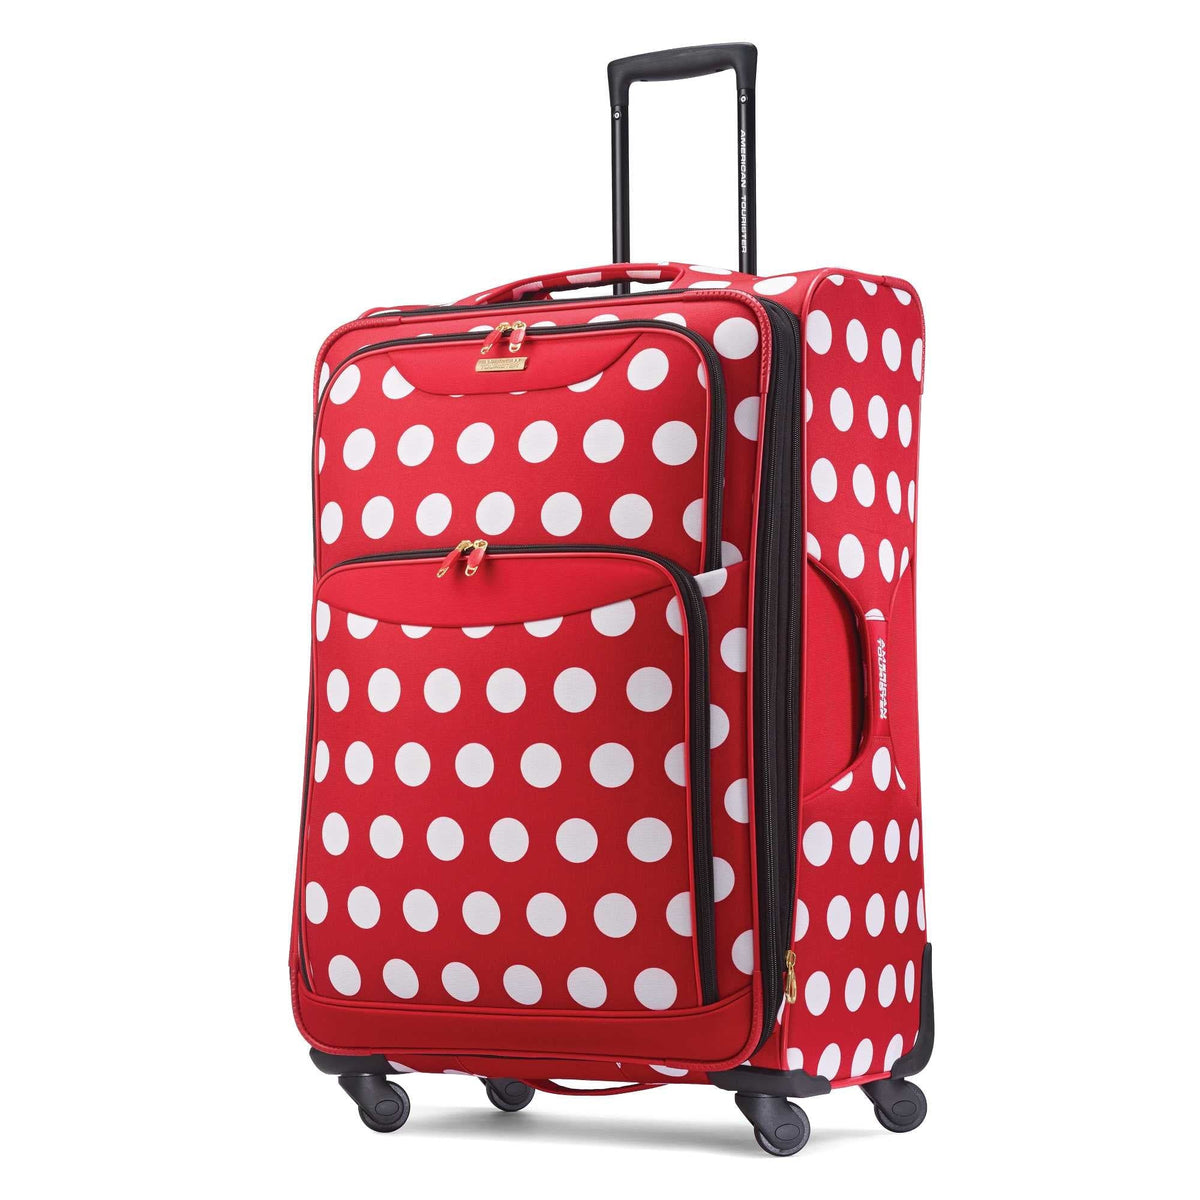 American Tourister Disney 28 Softside Spinner Luggage Minnie Mouse Polka Dot